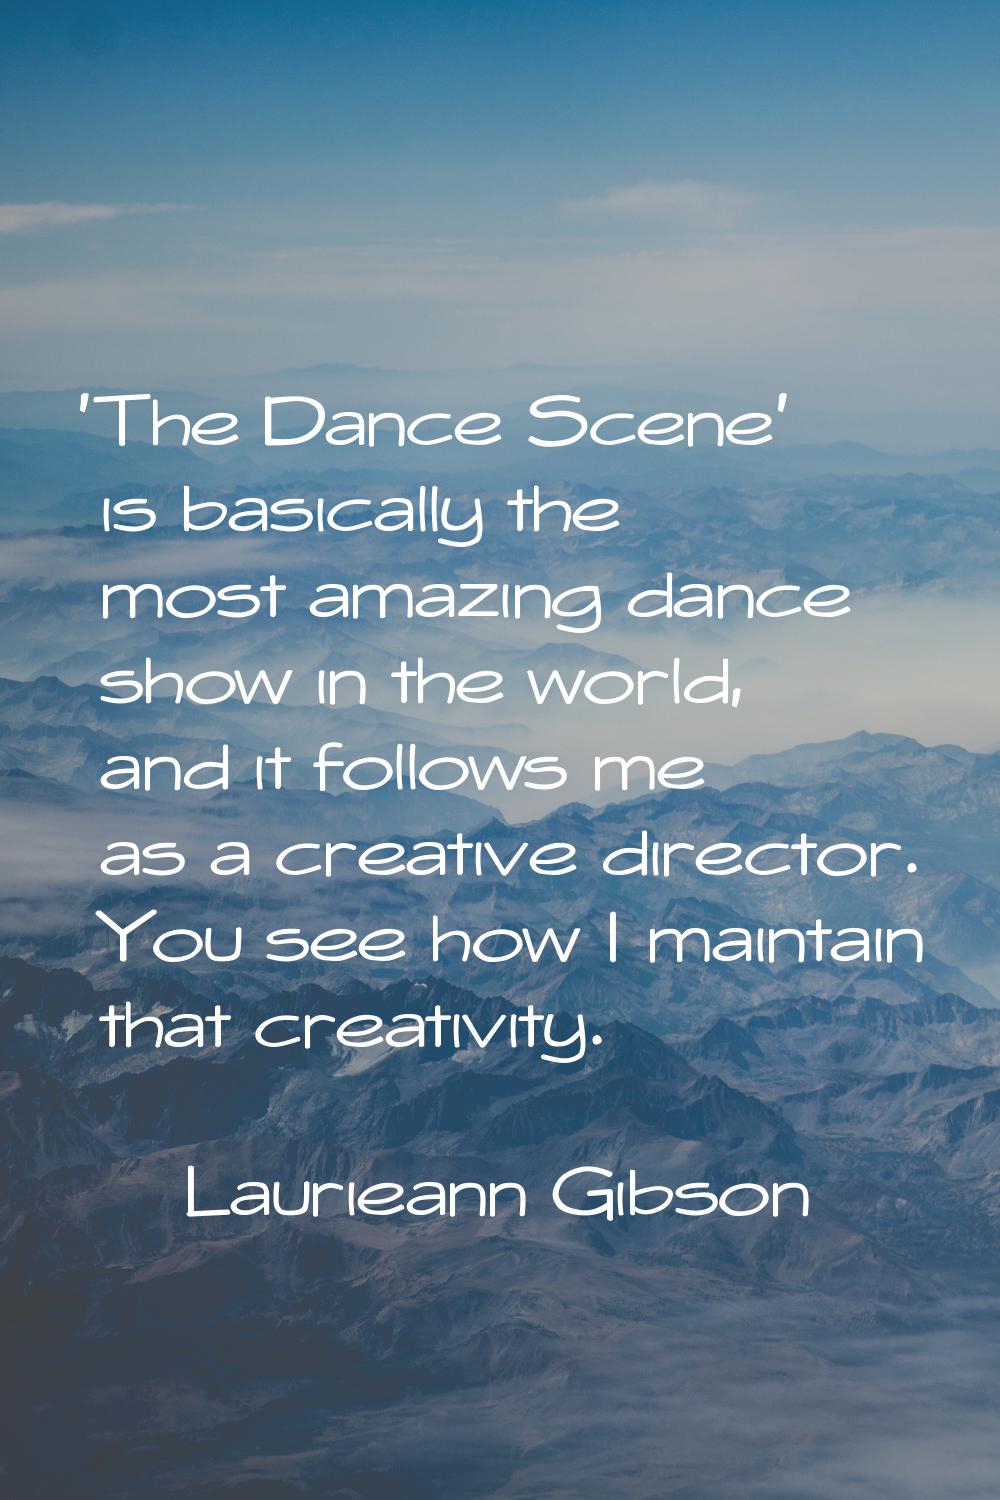 'The Dance Scene' is basically the most amazing dance show in the world, and it follows me as a cre